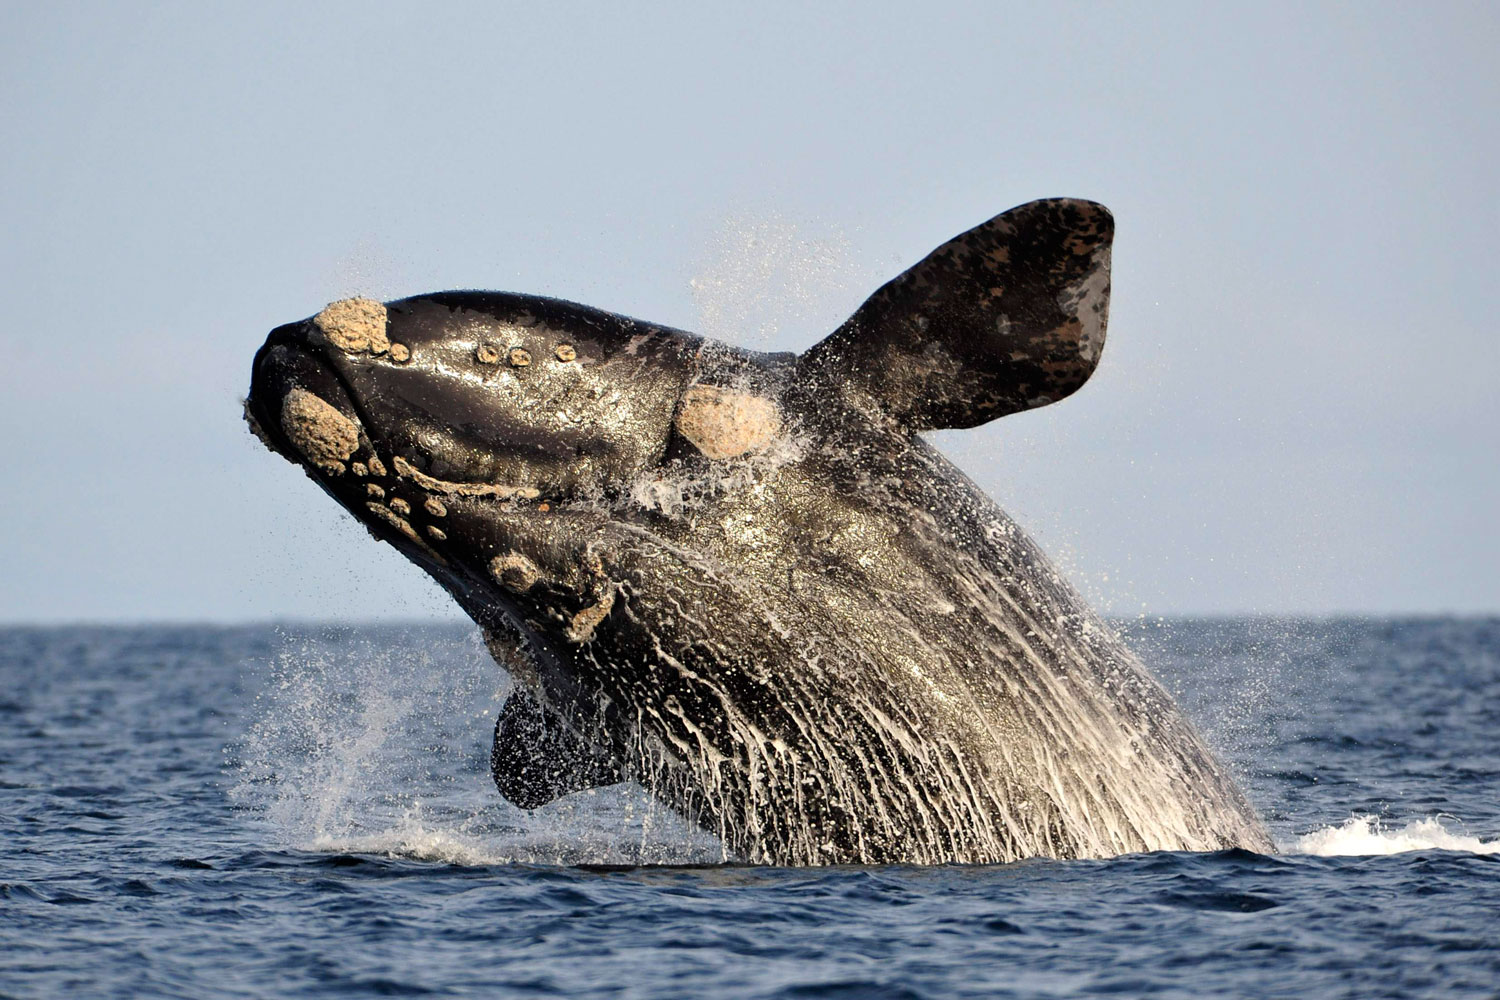 A southern right whale, known in Spanish as 'ballena franca austral,' jumps out of the water in the Atlantic Sea near Argentina's Patagonian village of Puerto Piramides. The whales regularly come to breed and calve in this marine reserve from June to December.